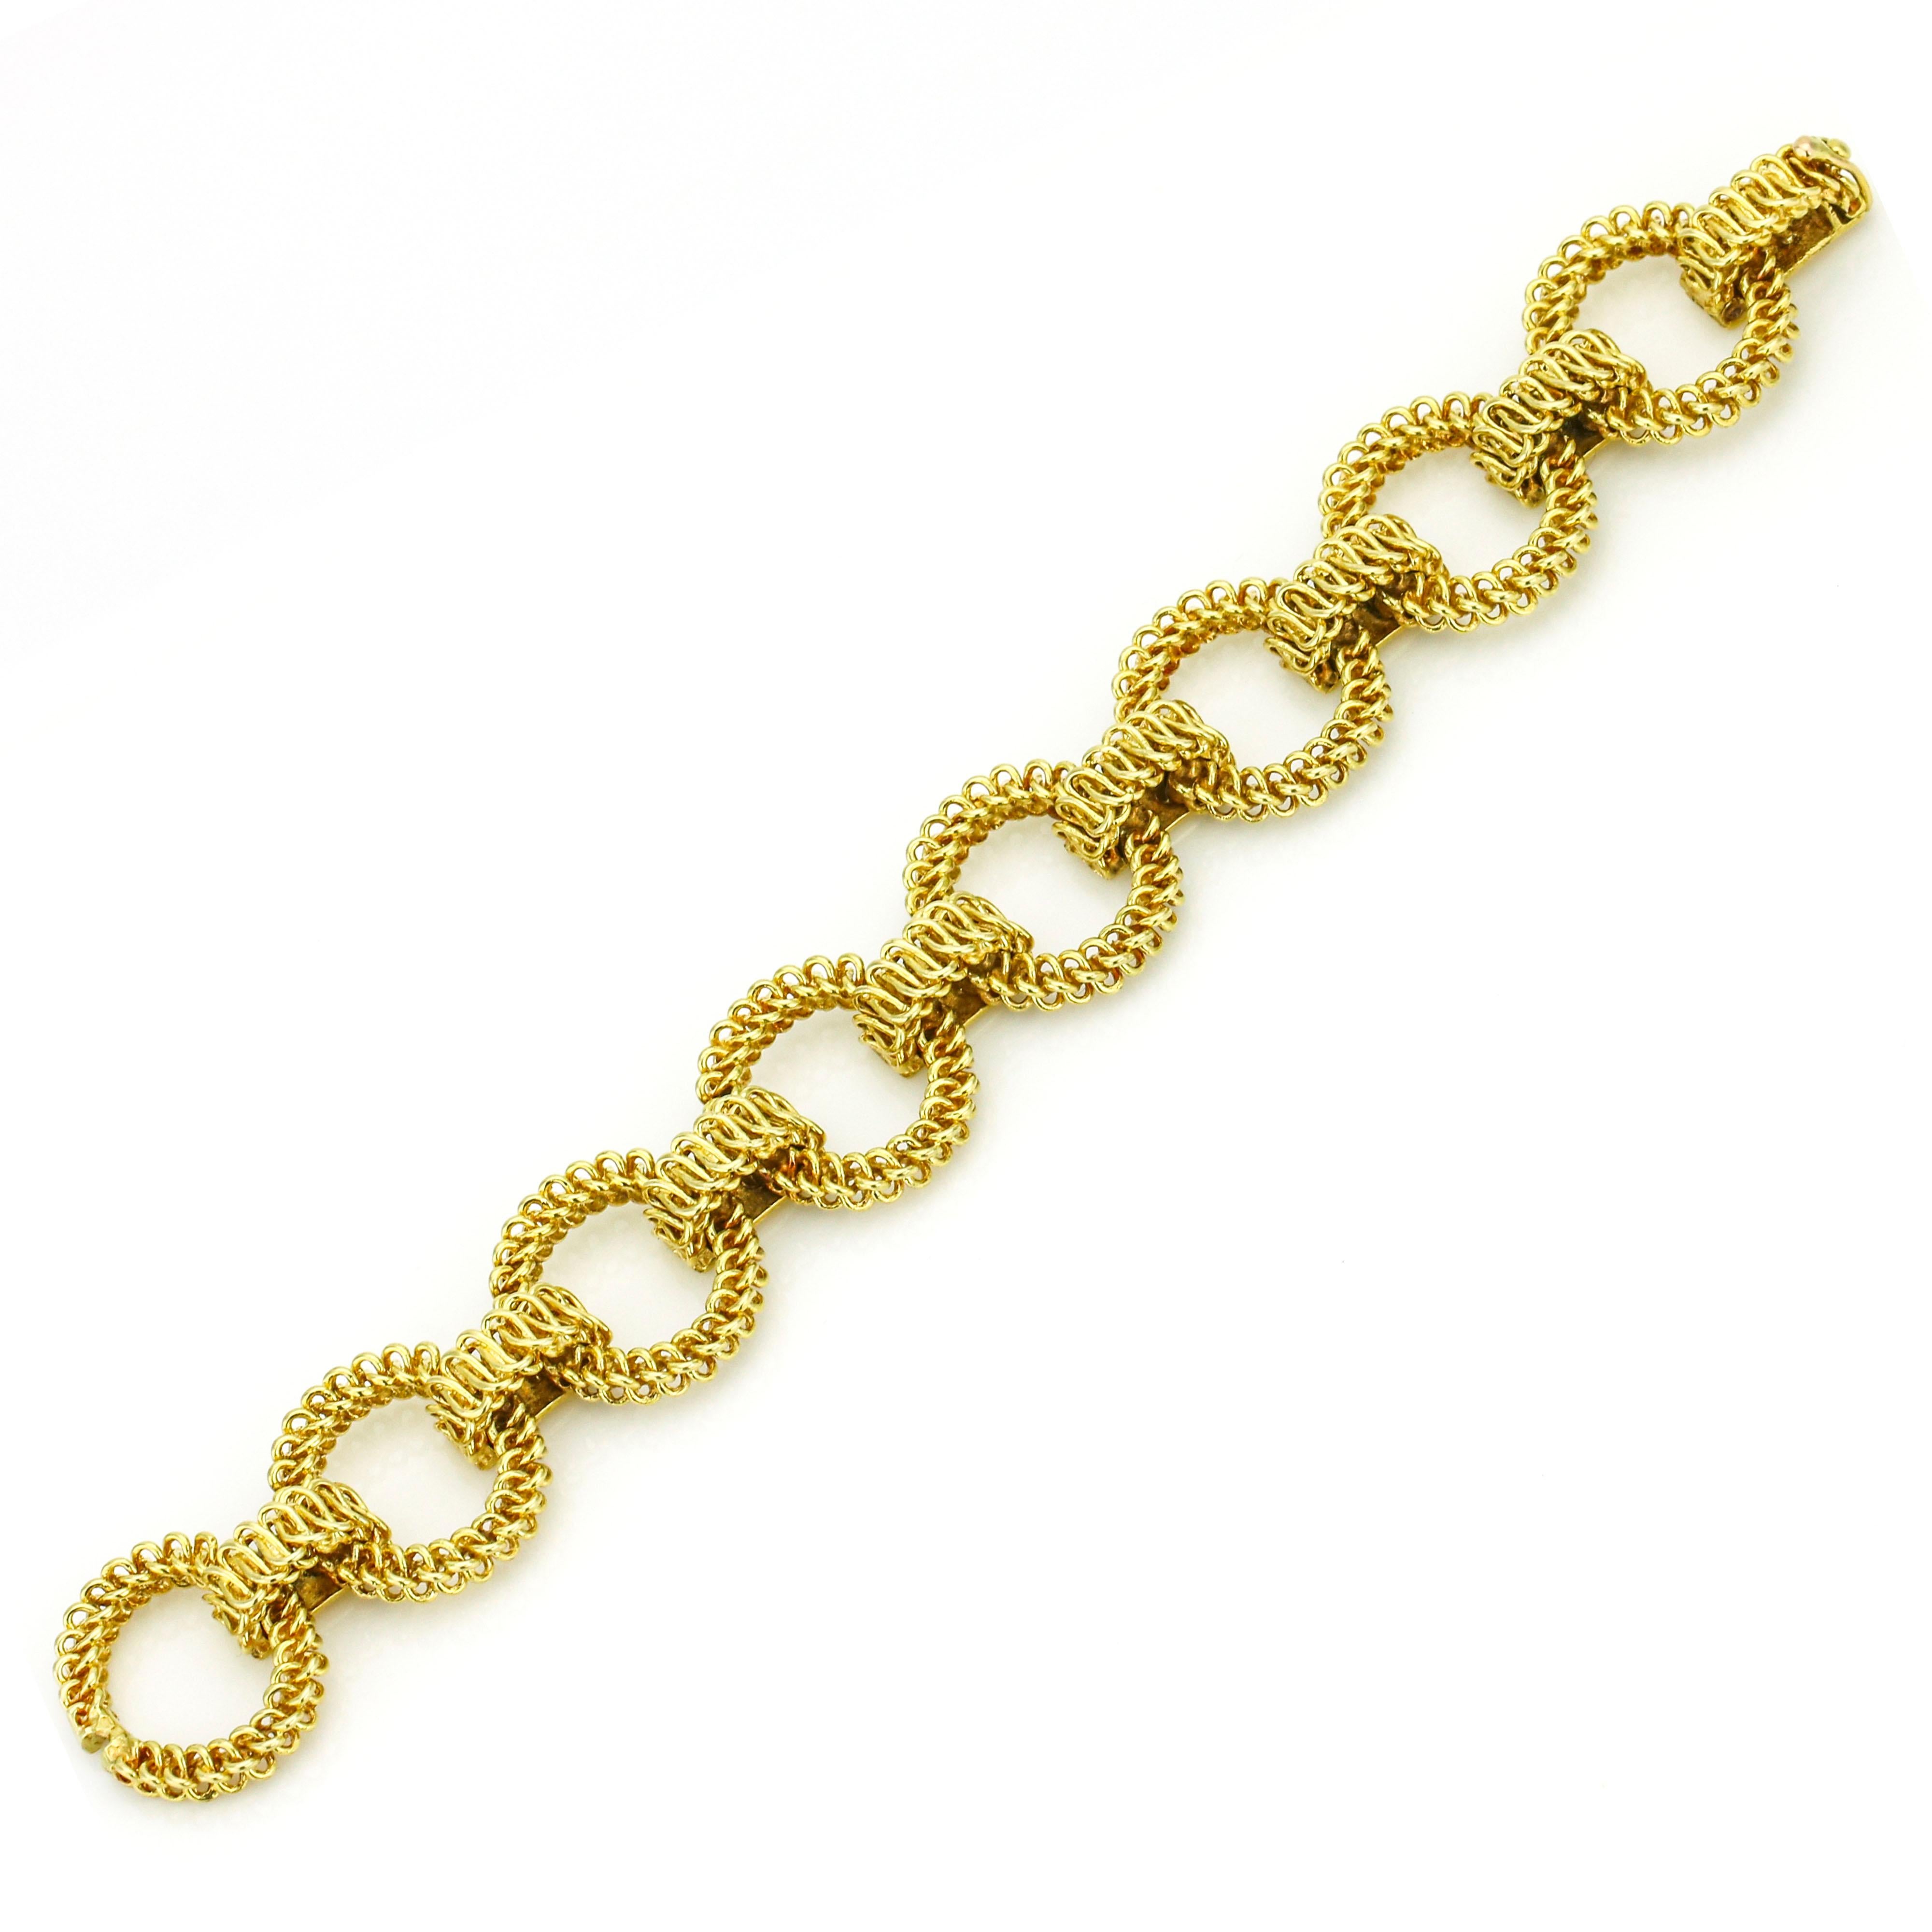 Vintage Tiffany & Co. textured open link bracelet in 18-karat yellow gold. Circa 1960s. Made in France. Hidden clasp with safety. Size medium.